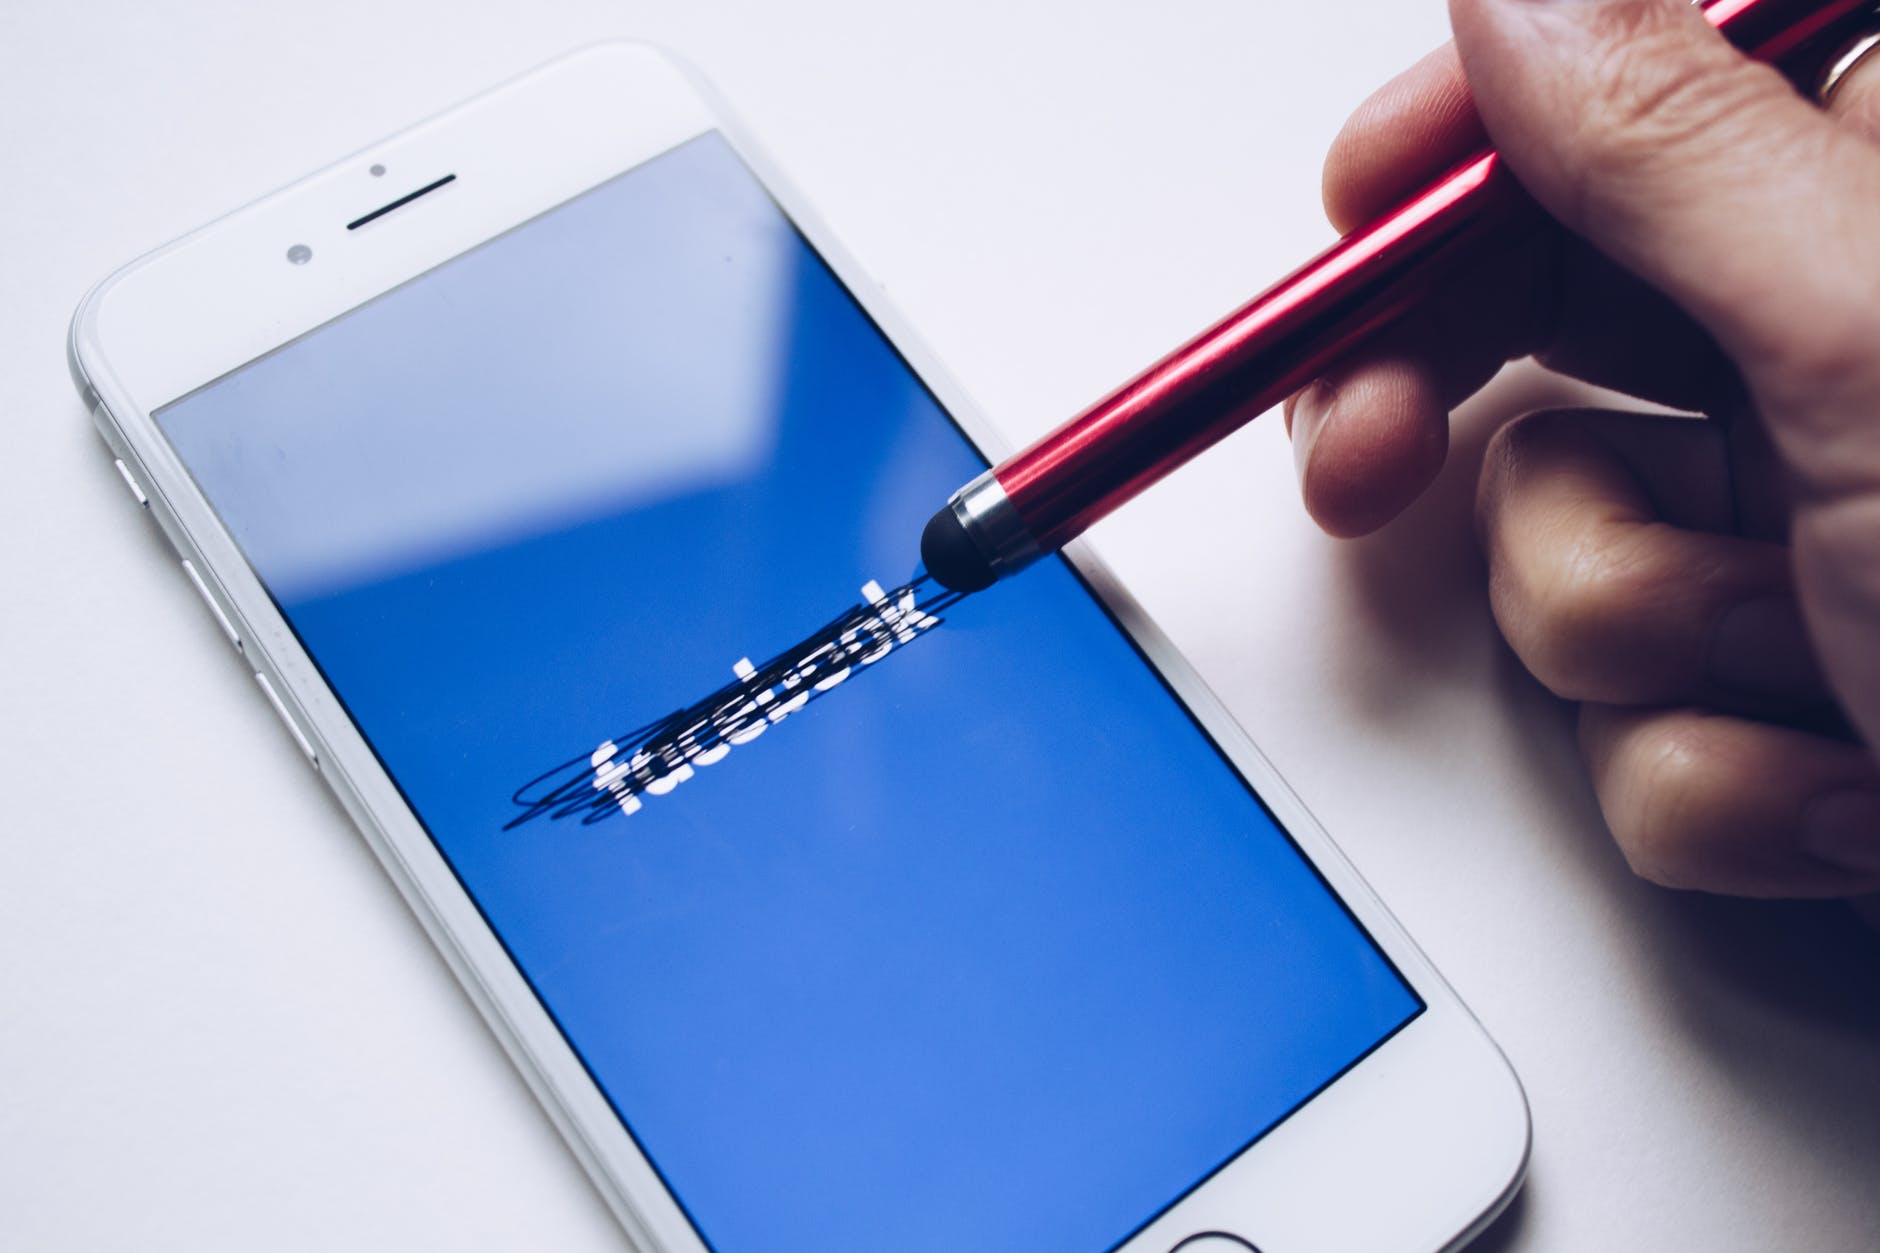 Person crossing out the Facebook logo on their phone with a pencil eraser